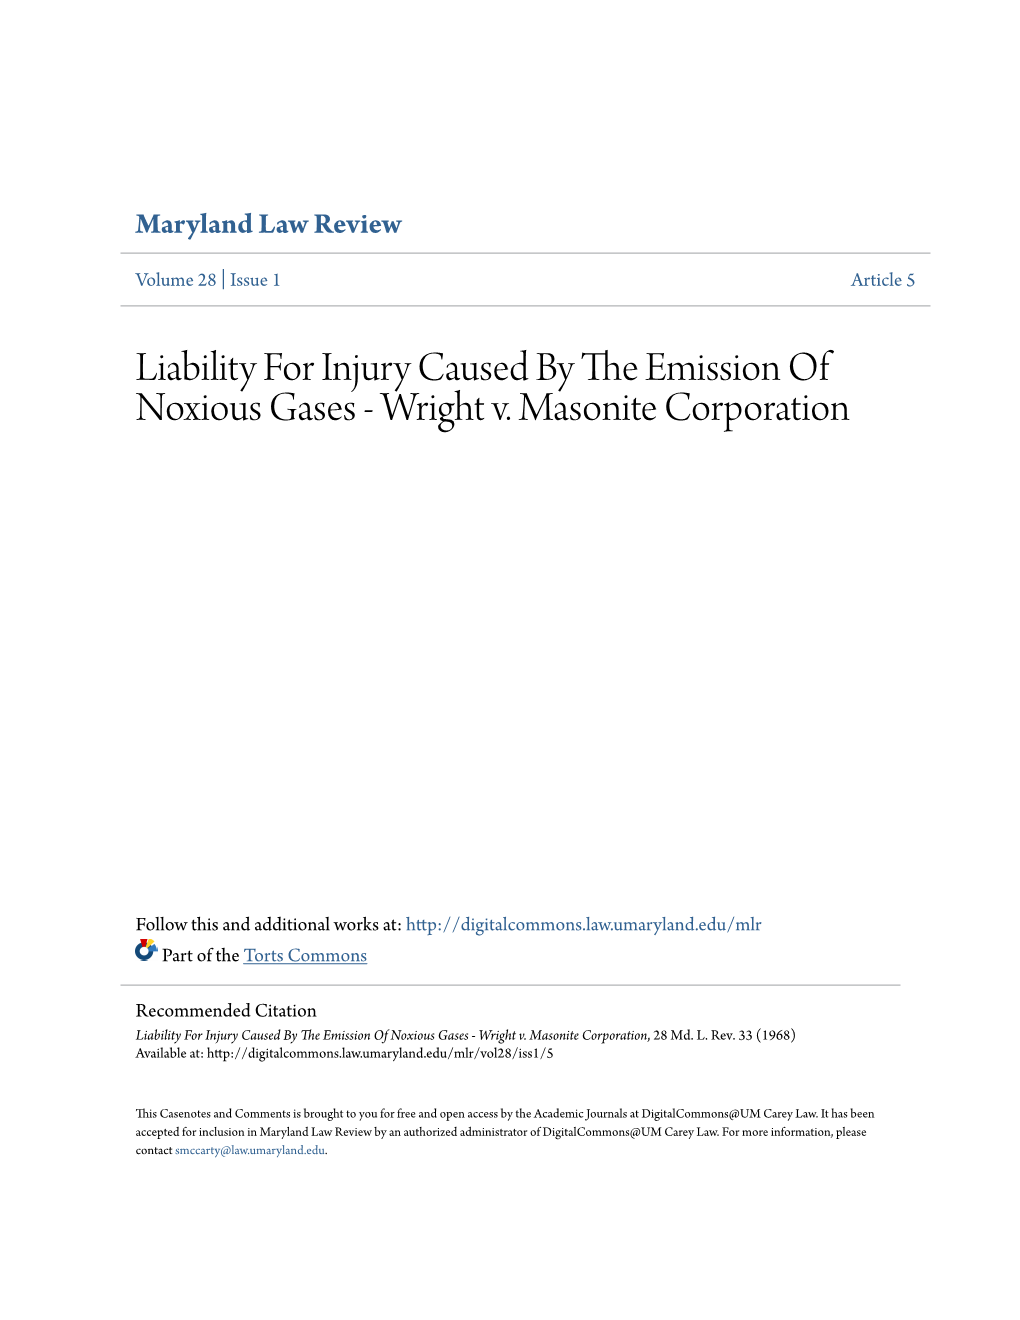 Liability for Injury Caused by the Emission of Noxious Gases - Wright V